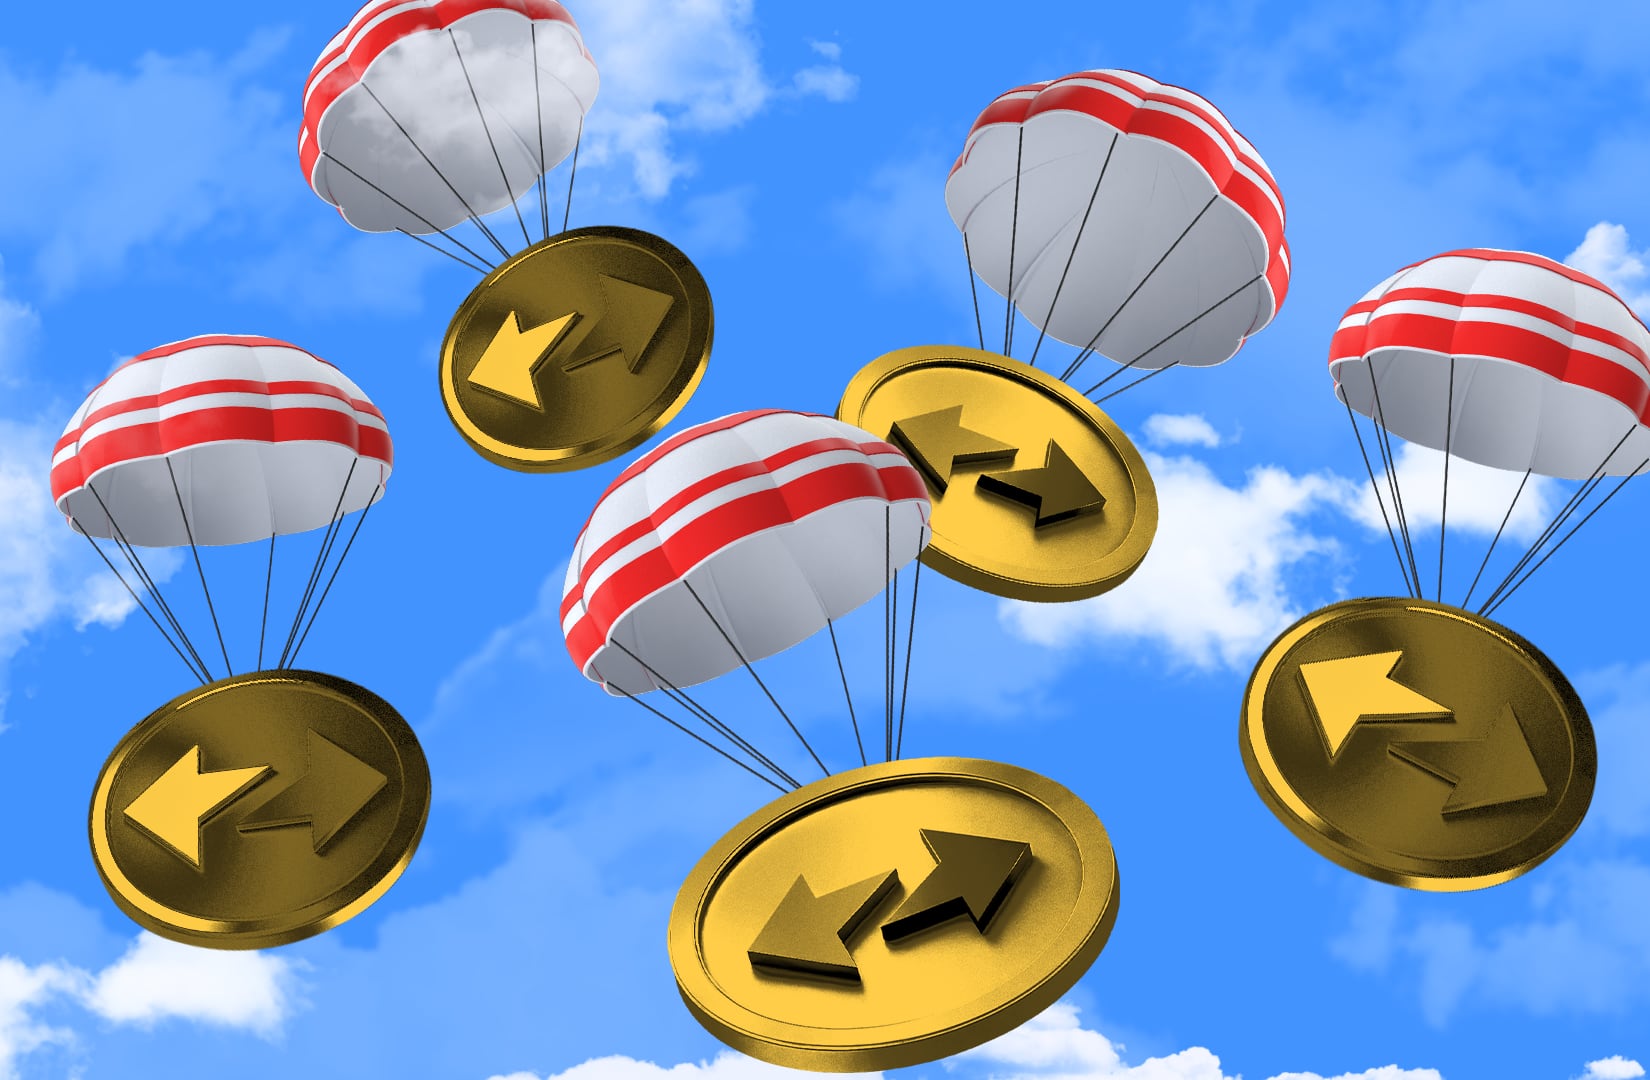 Binance tries to mollify ZKsync users left out of airdrop with $2.4m distribution